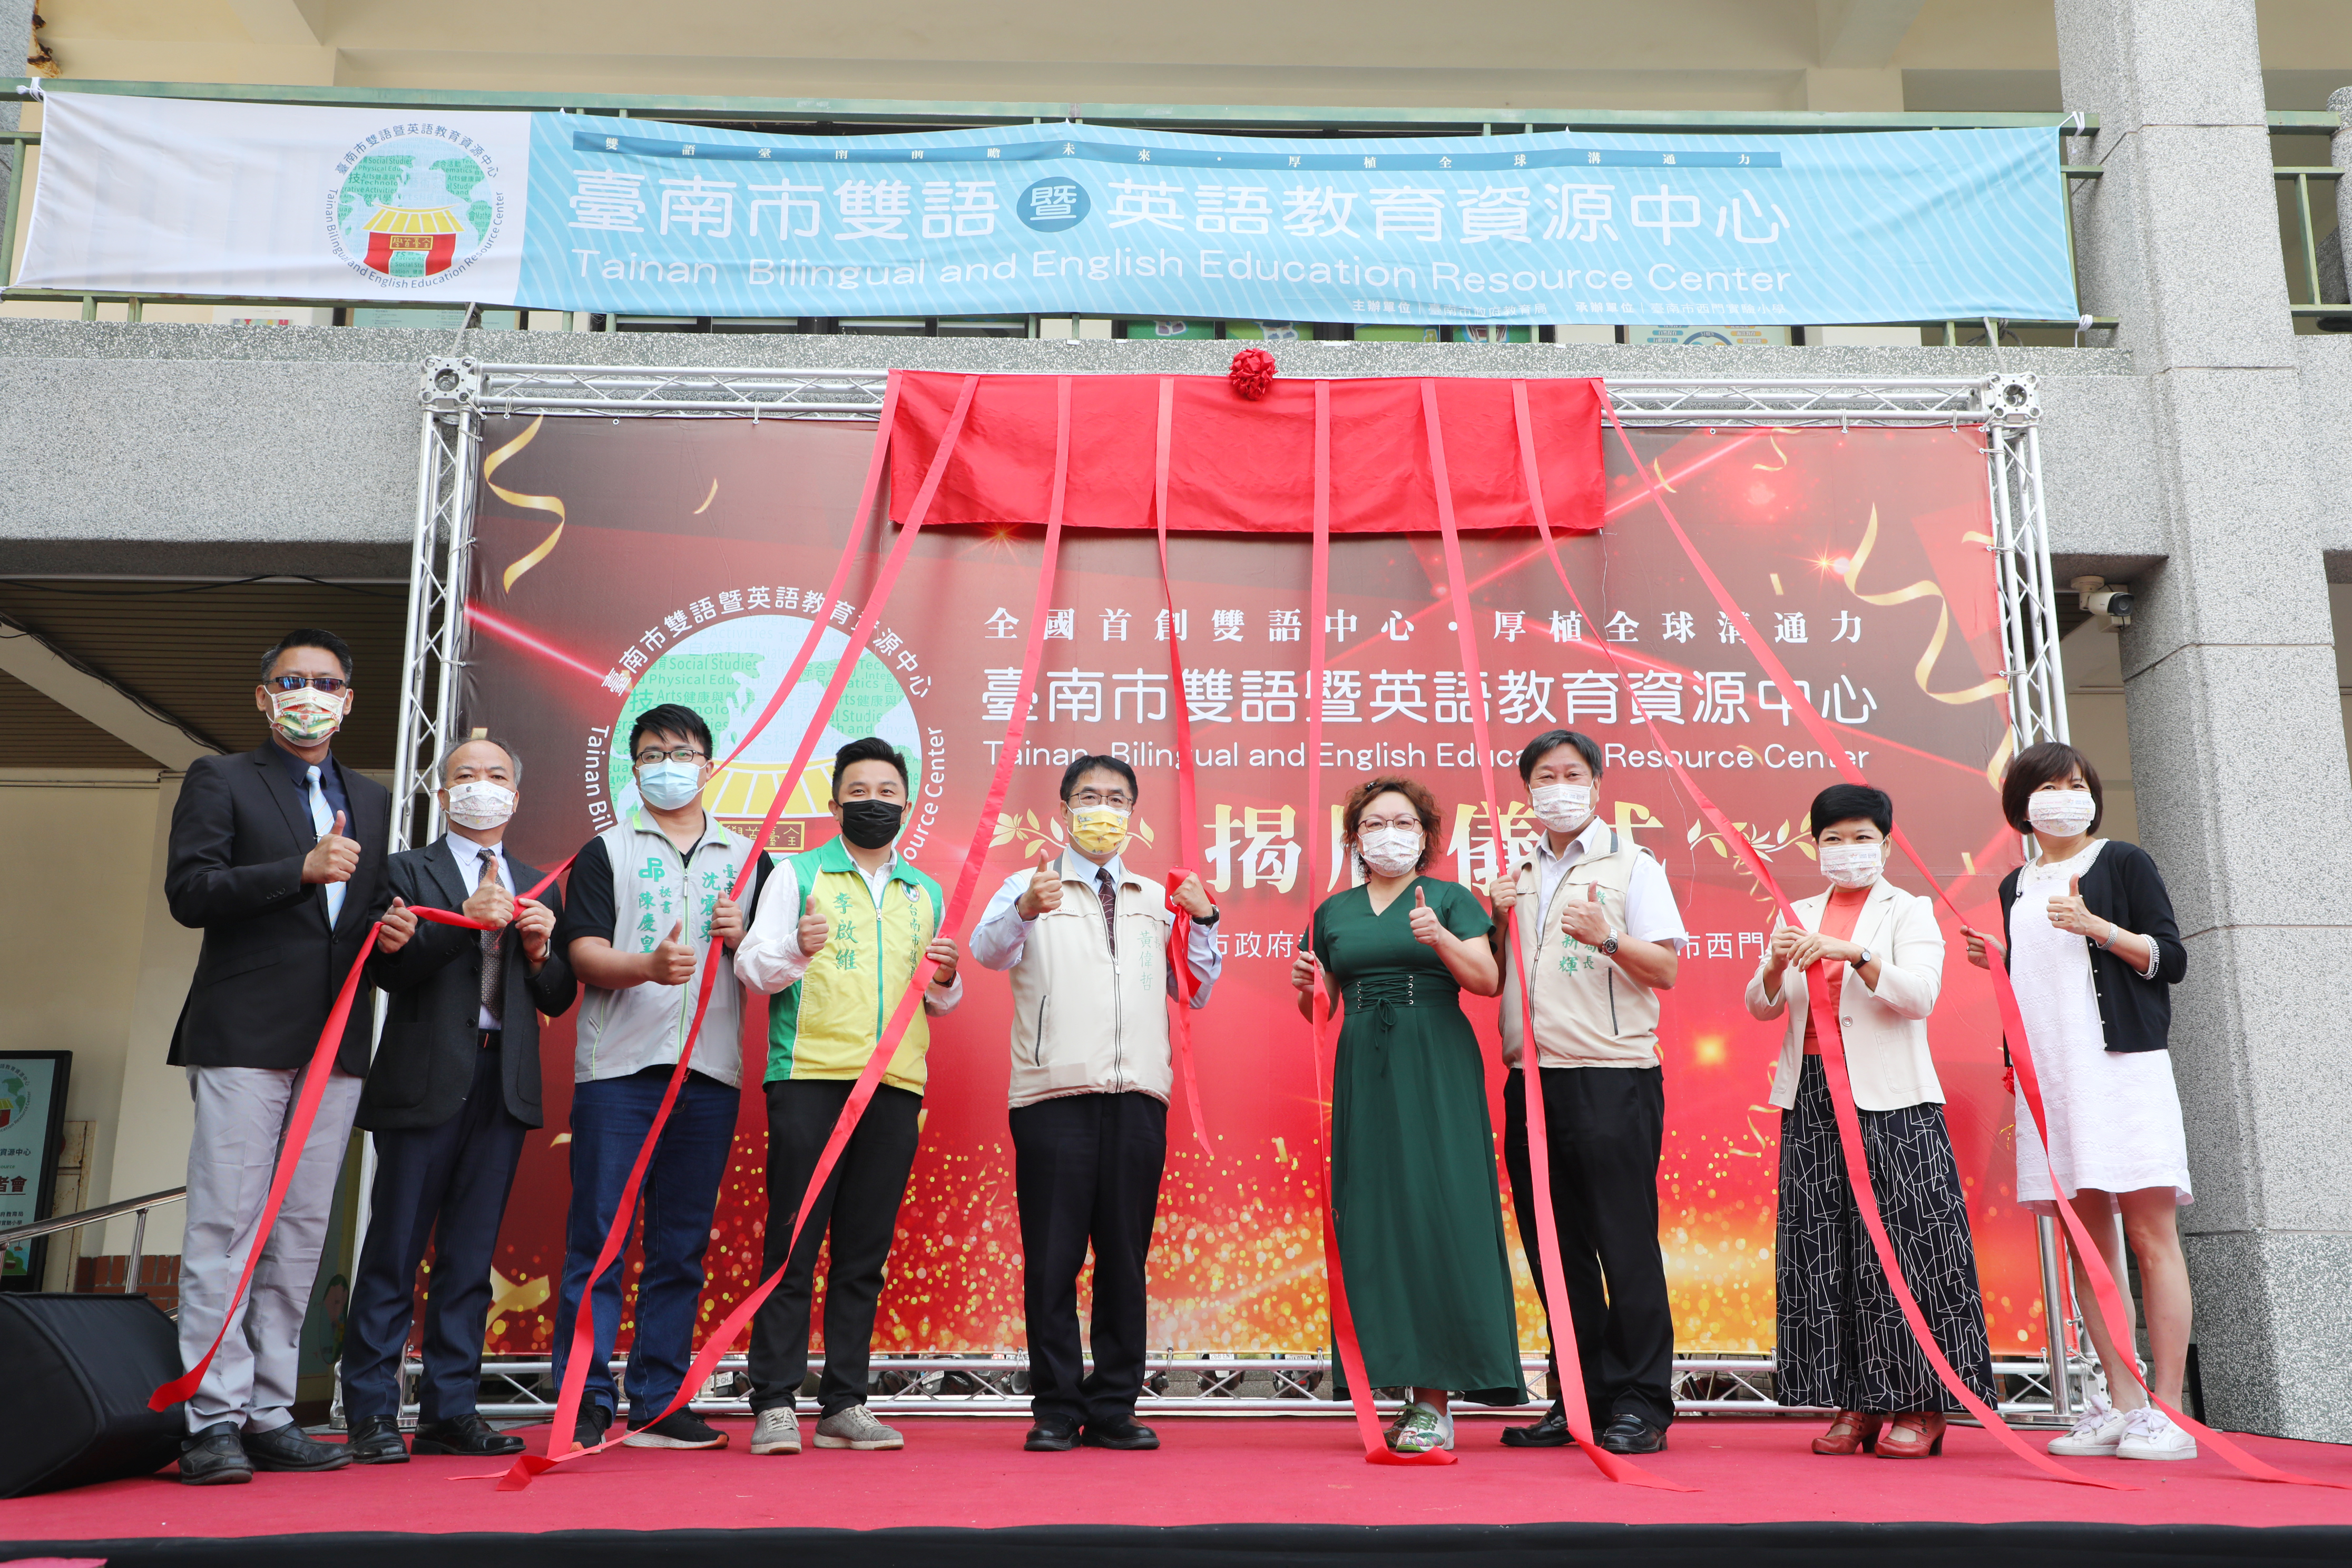 Tainan City Government took the lead in establishing the "Bilingual and English Education Resource Center". (Photo / Provided by the Tainan City Government)